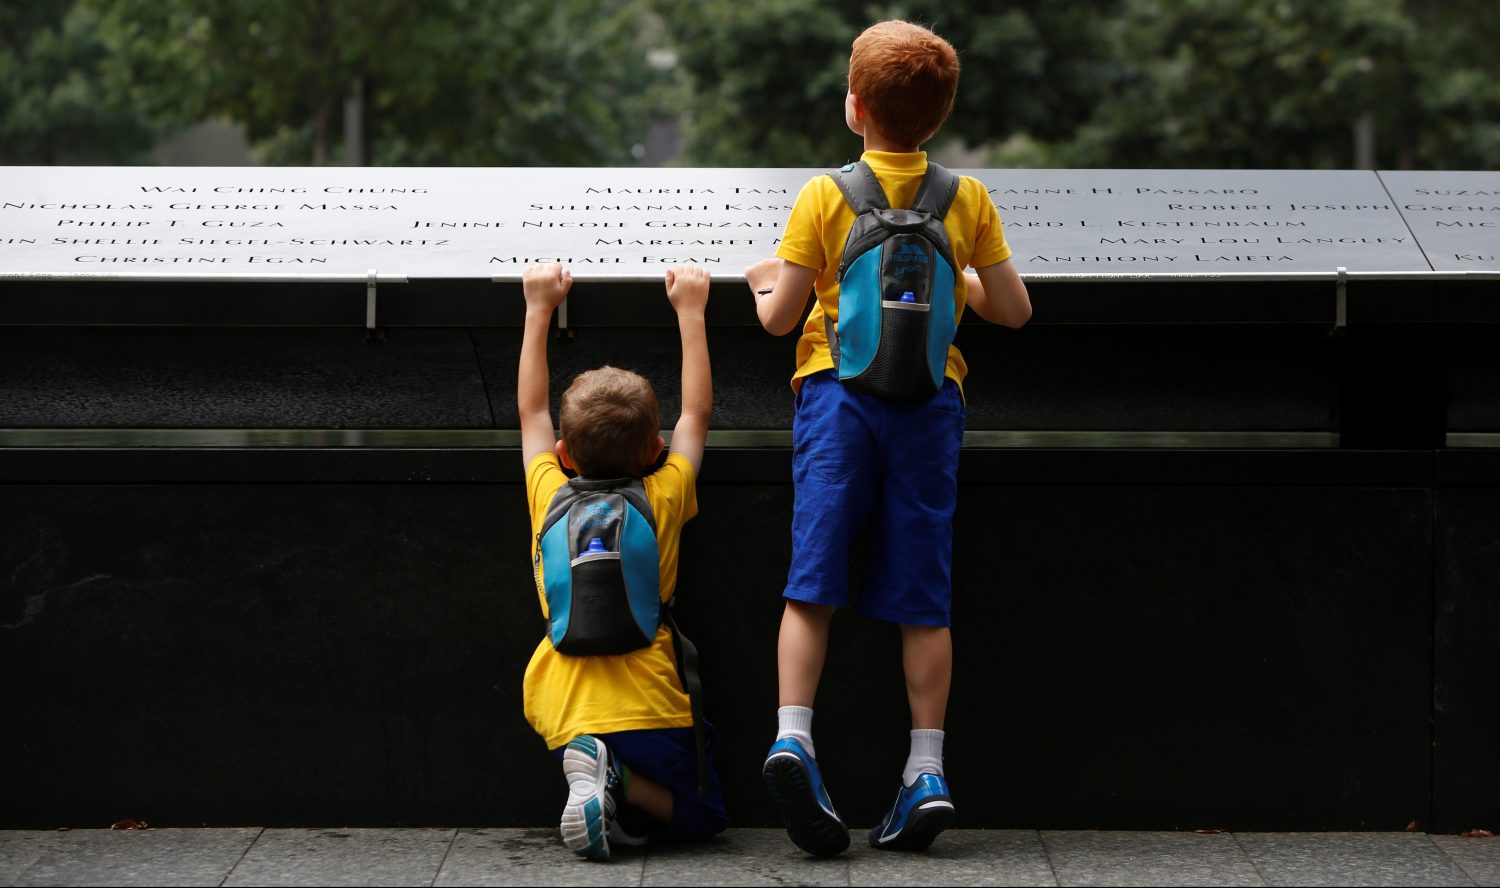 Children peer into the south reflecting pool at the National September 11 Memorial and Museum .